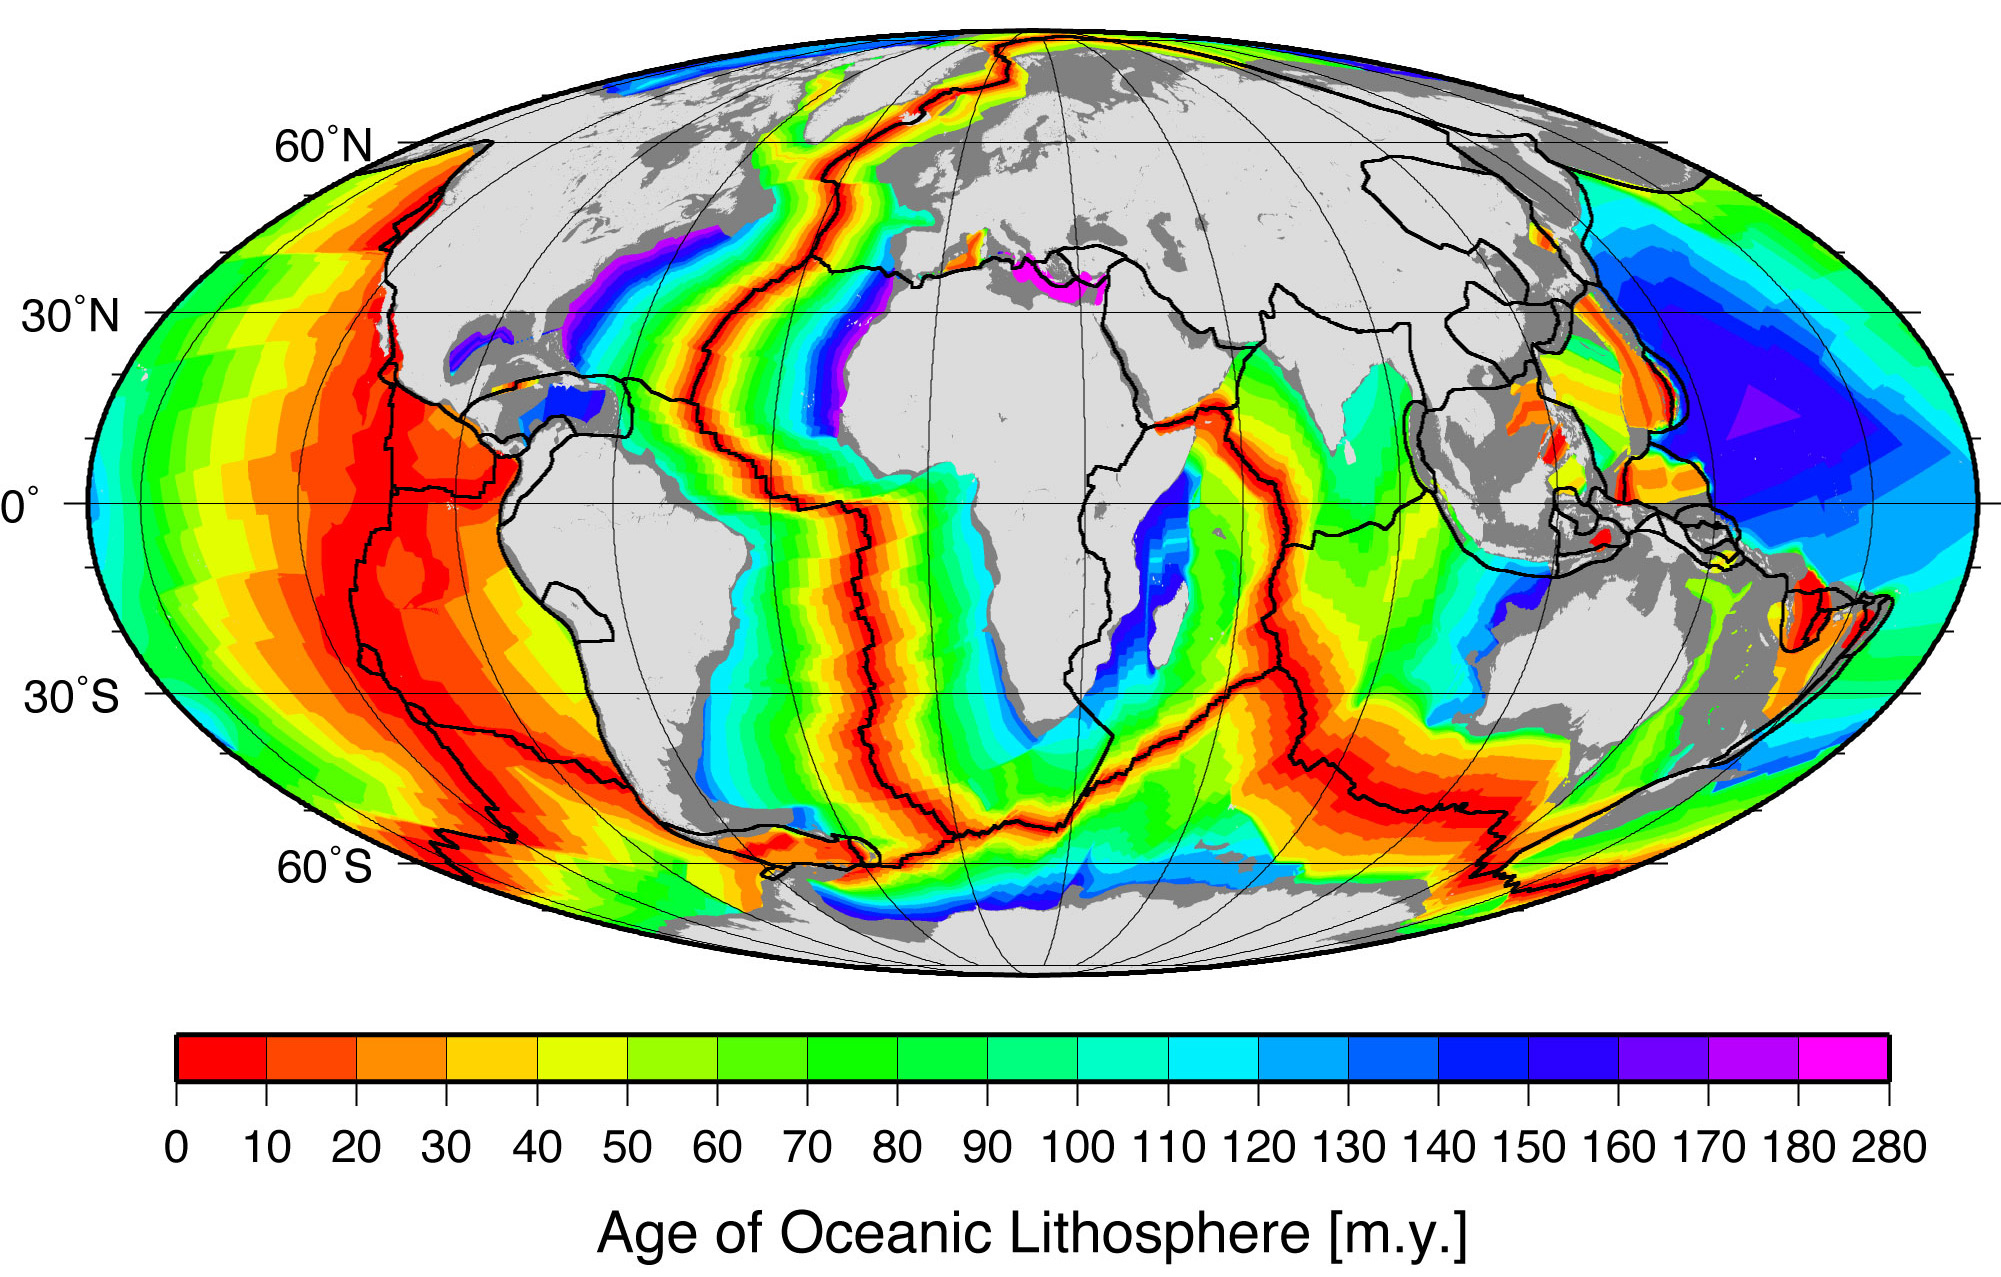 Color-coded world map that shows the various ages of oceanic lithosphere. Continents are in gray. The color-coding and locations are as follows: the youngest oceanic lithosphere is 0 million years old and runs along the centers of the ocean basins where there are mid-ocean ridges, colored in red. Oceanic lithosphere ages get older away from the mid-ocean ridges, and the oldest oceanic lithosphere is 280 million years old near continental margins, colored purple.